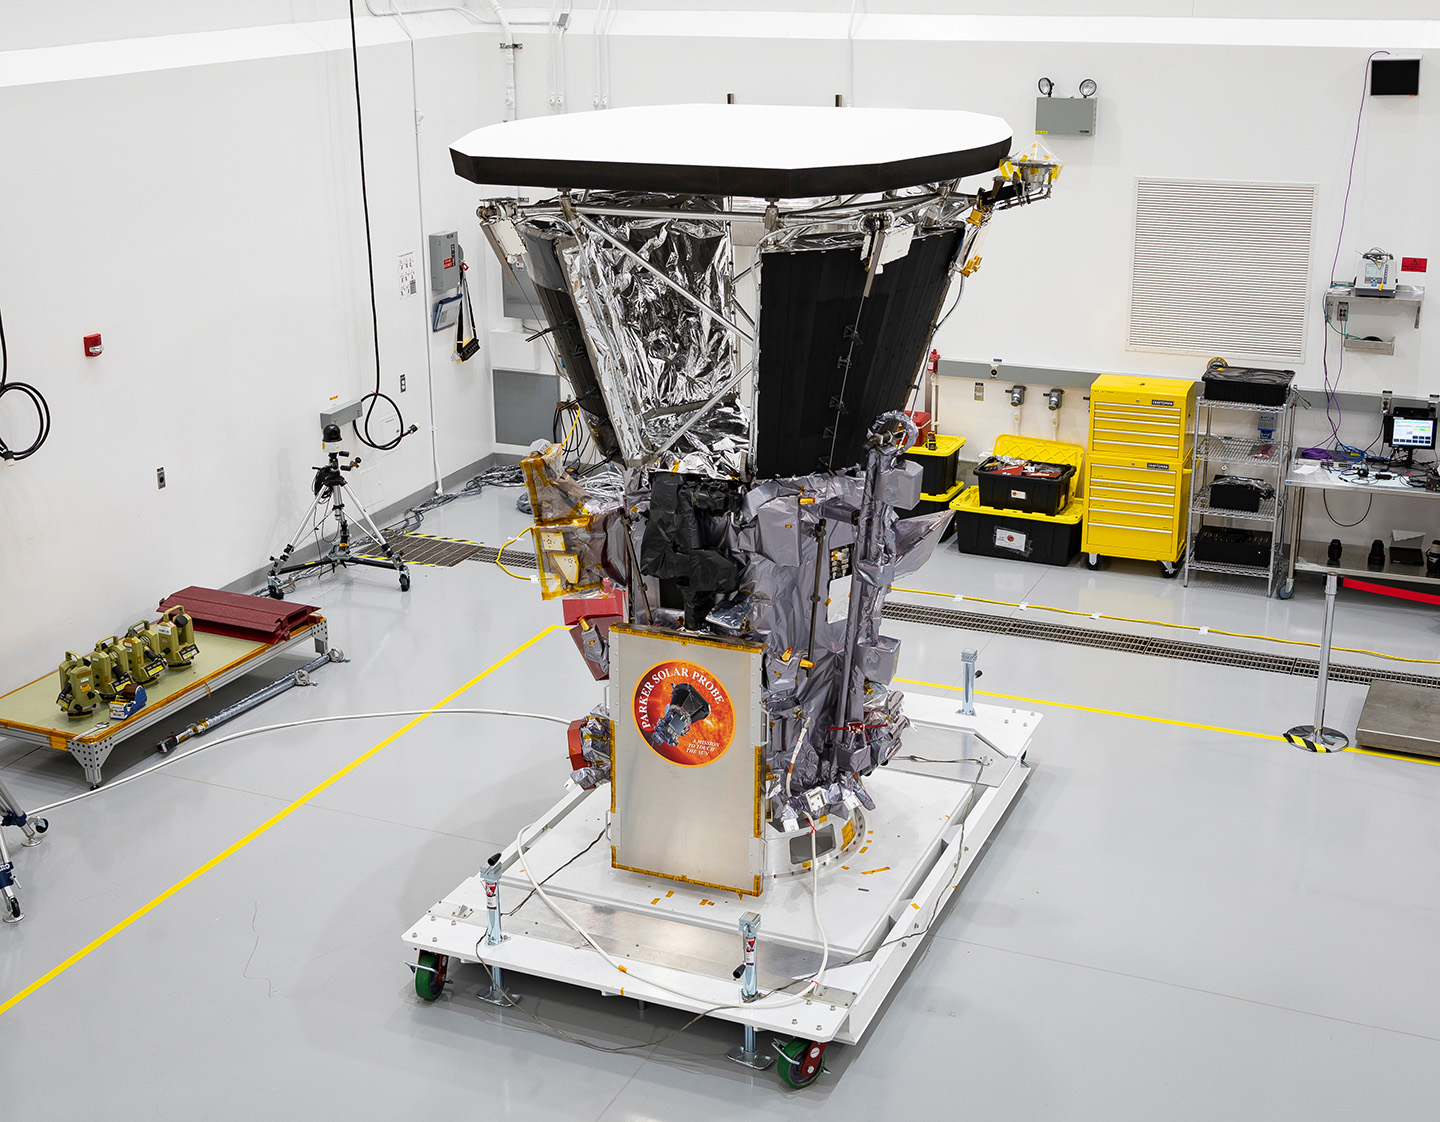 The Parker Solar Probe spacecraft in a white cleanroom